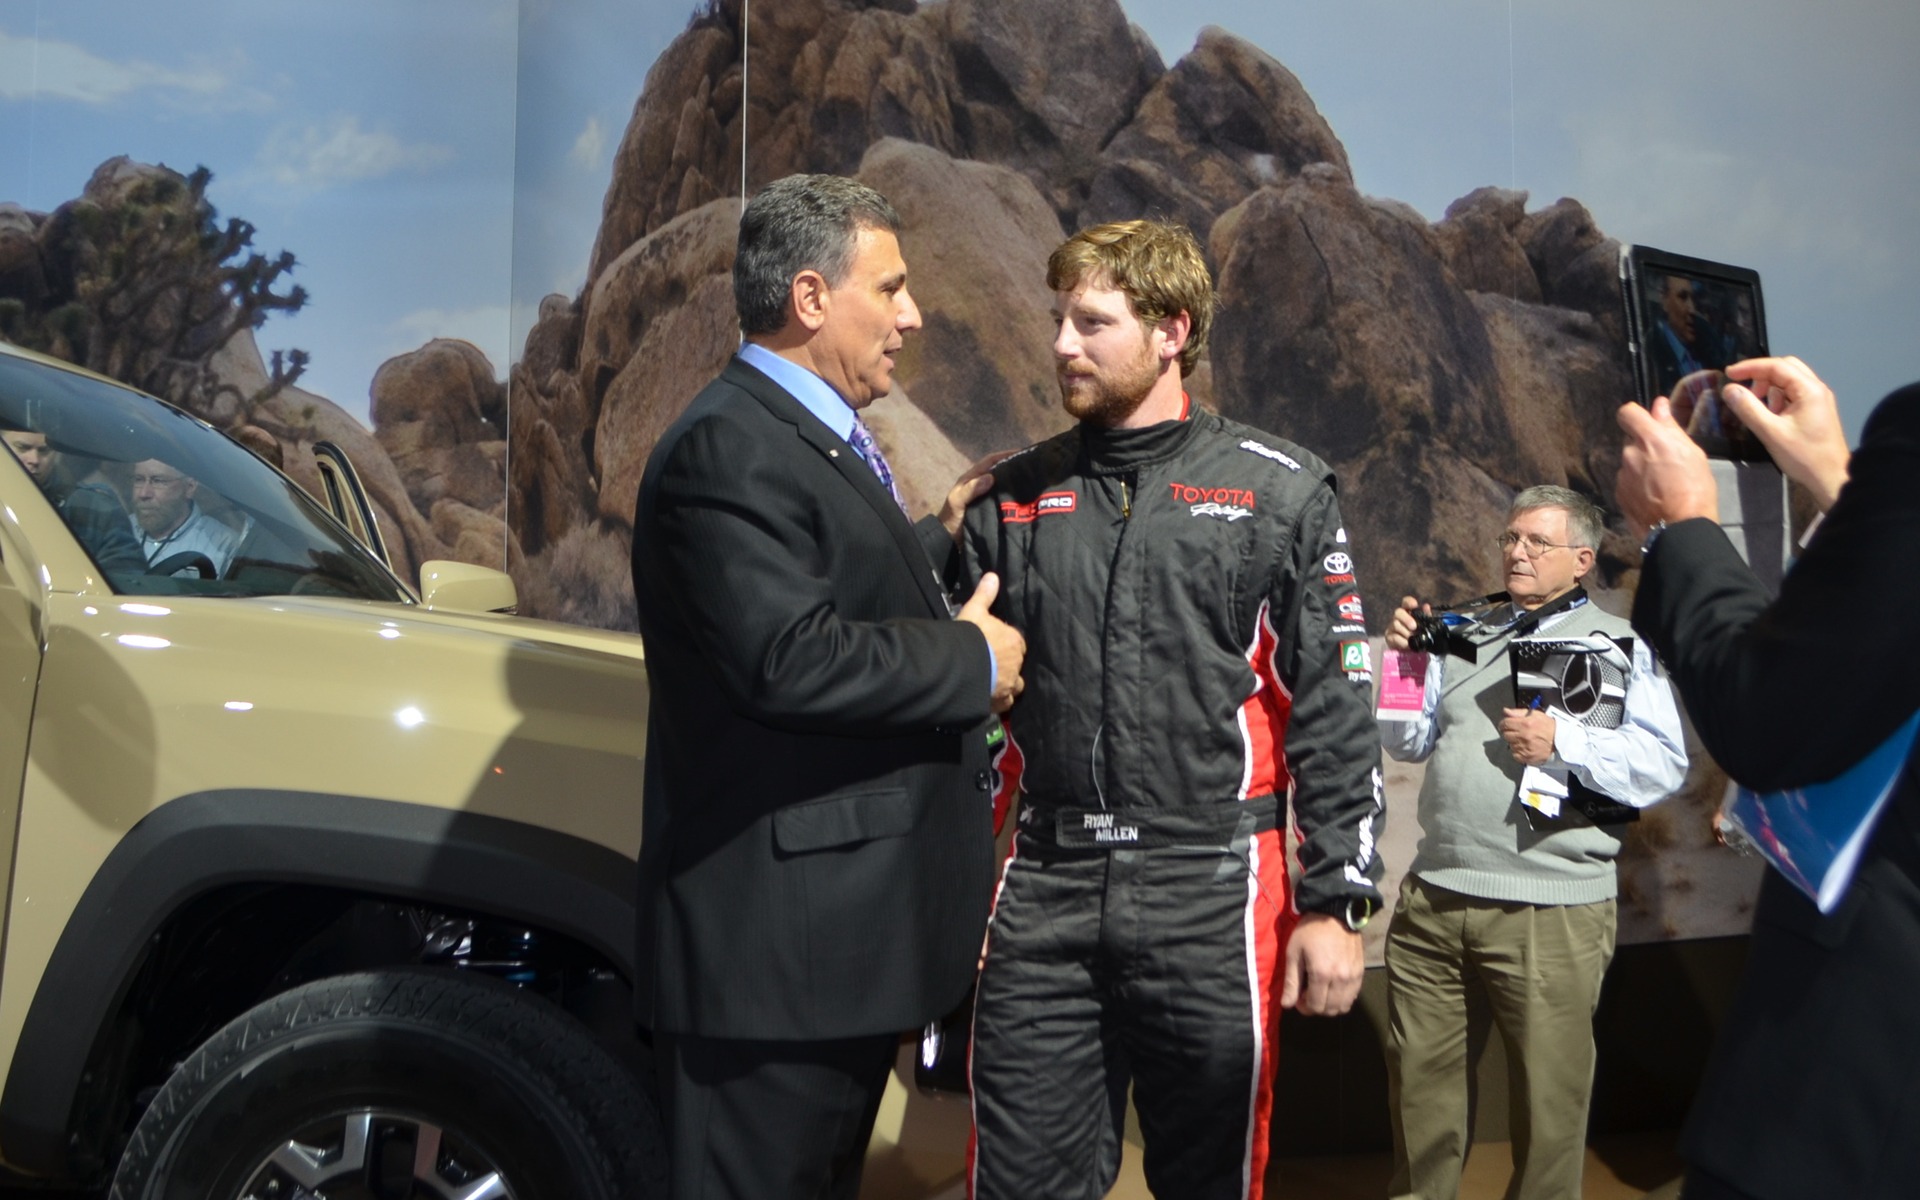 Ryan Millen, off road racer, presents the 2016 Toyota Tacoma TRD Off-Road.